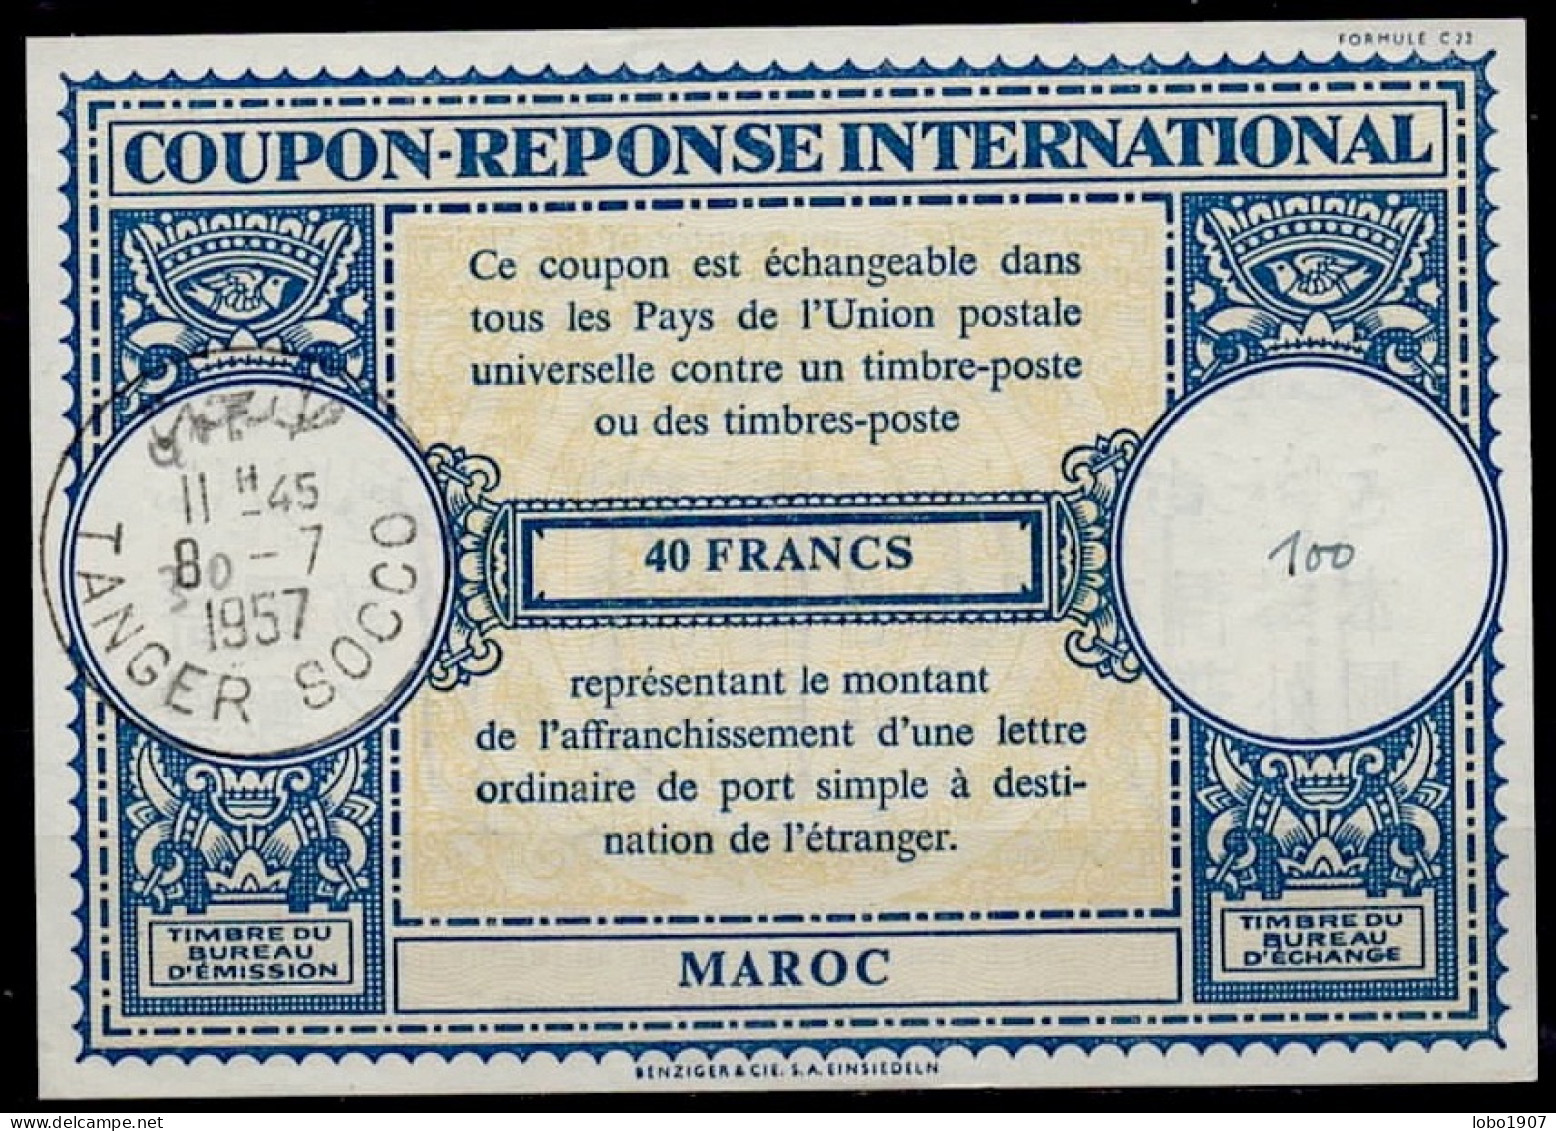 MAROC MOROCCO MARRUECOS  1930-2020  Collection 40 International and National Reply coupon reponse Antwortschein IAS IRC